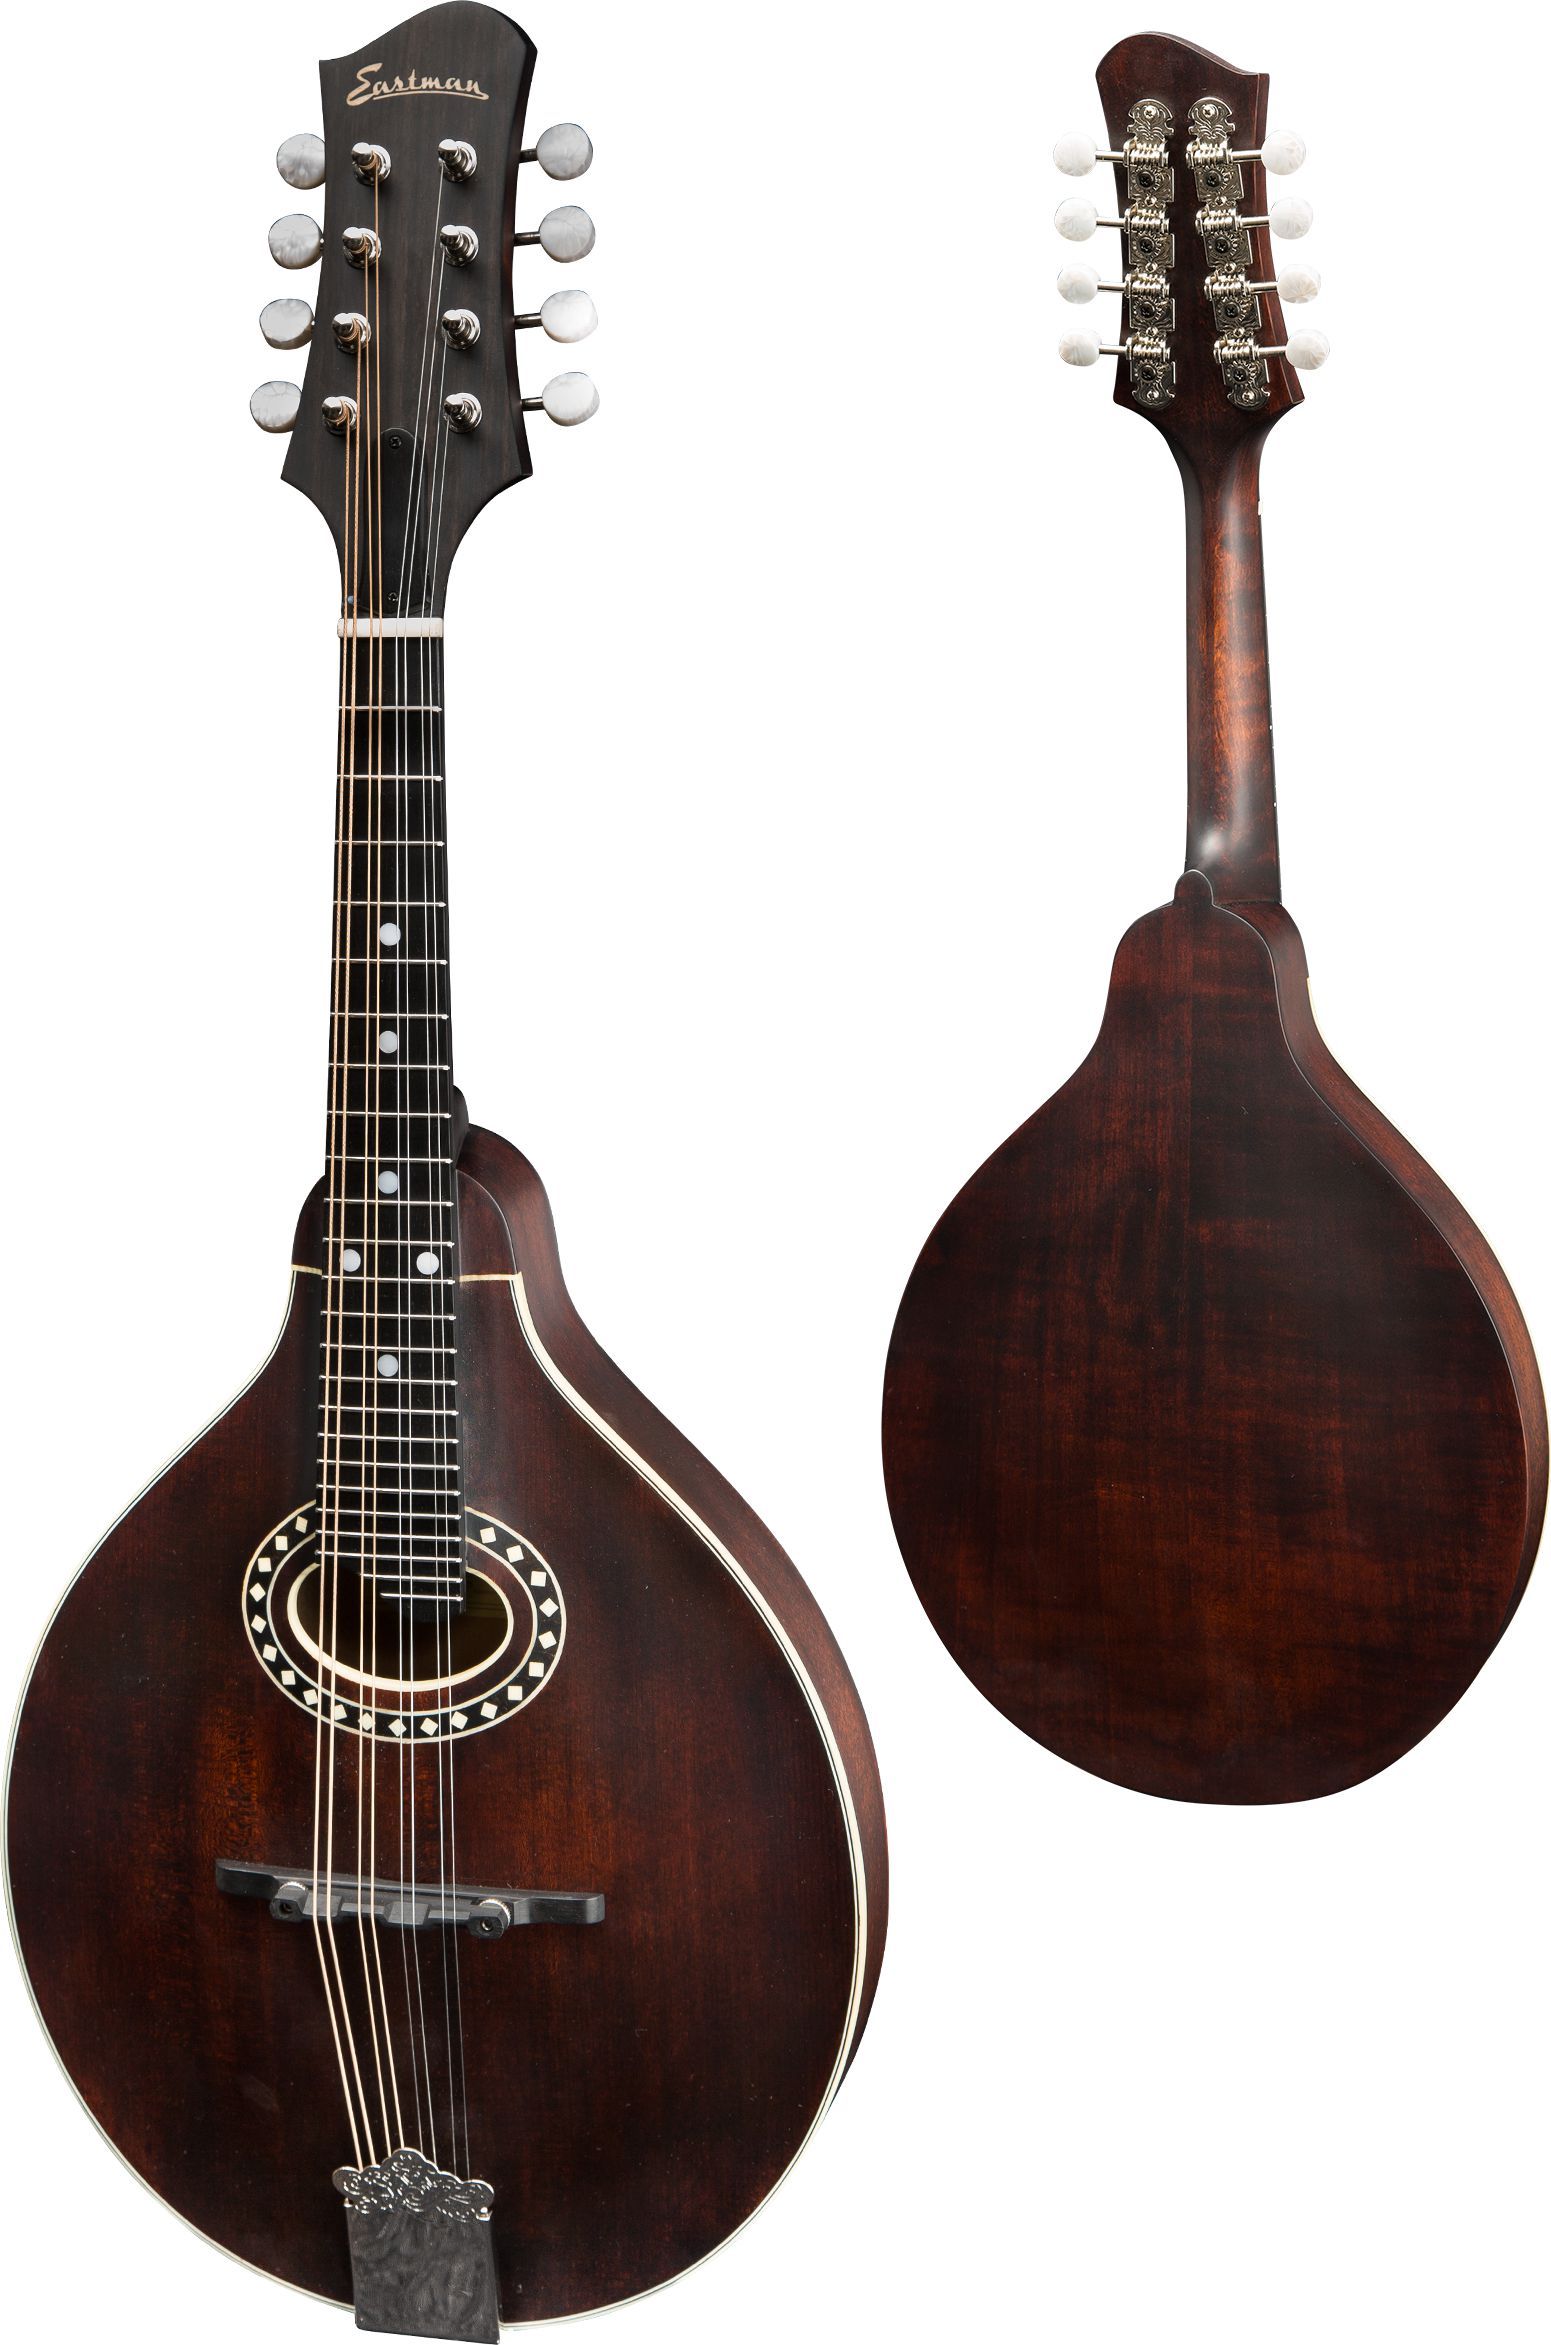 Eastman MD304 A-style Mandolin (oval hole, Solid Spruce top, Solid Maple back and sides, w/Gigbag), Mandolin for sale at Richards Guitars.